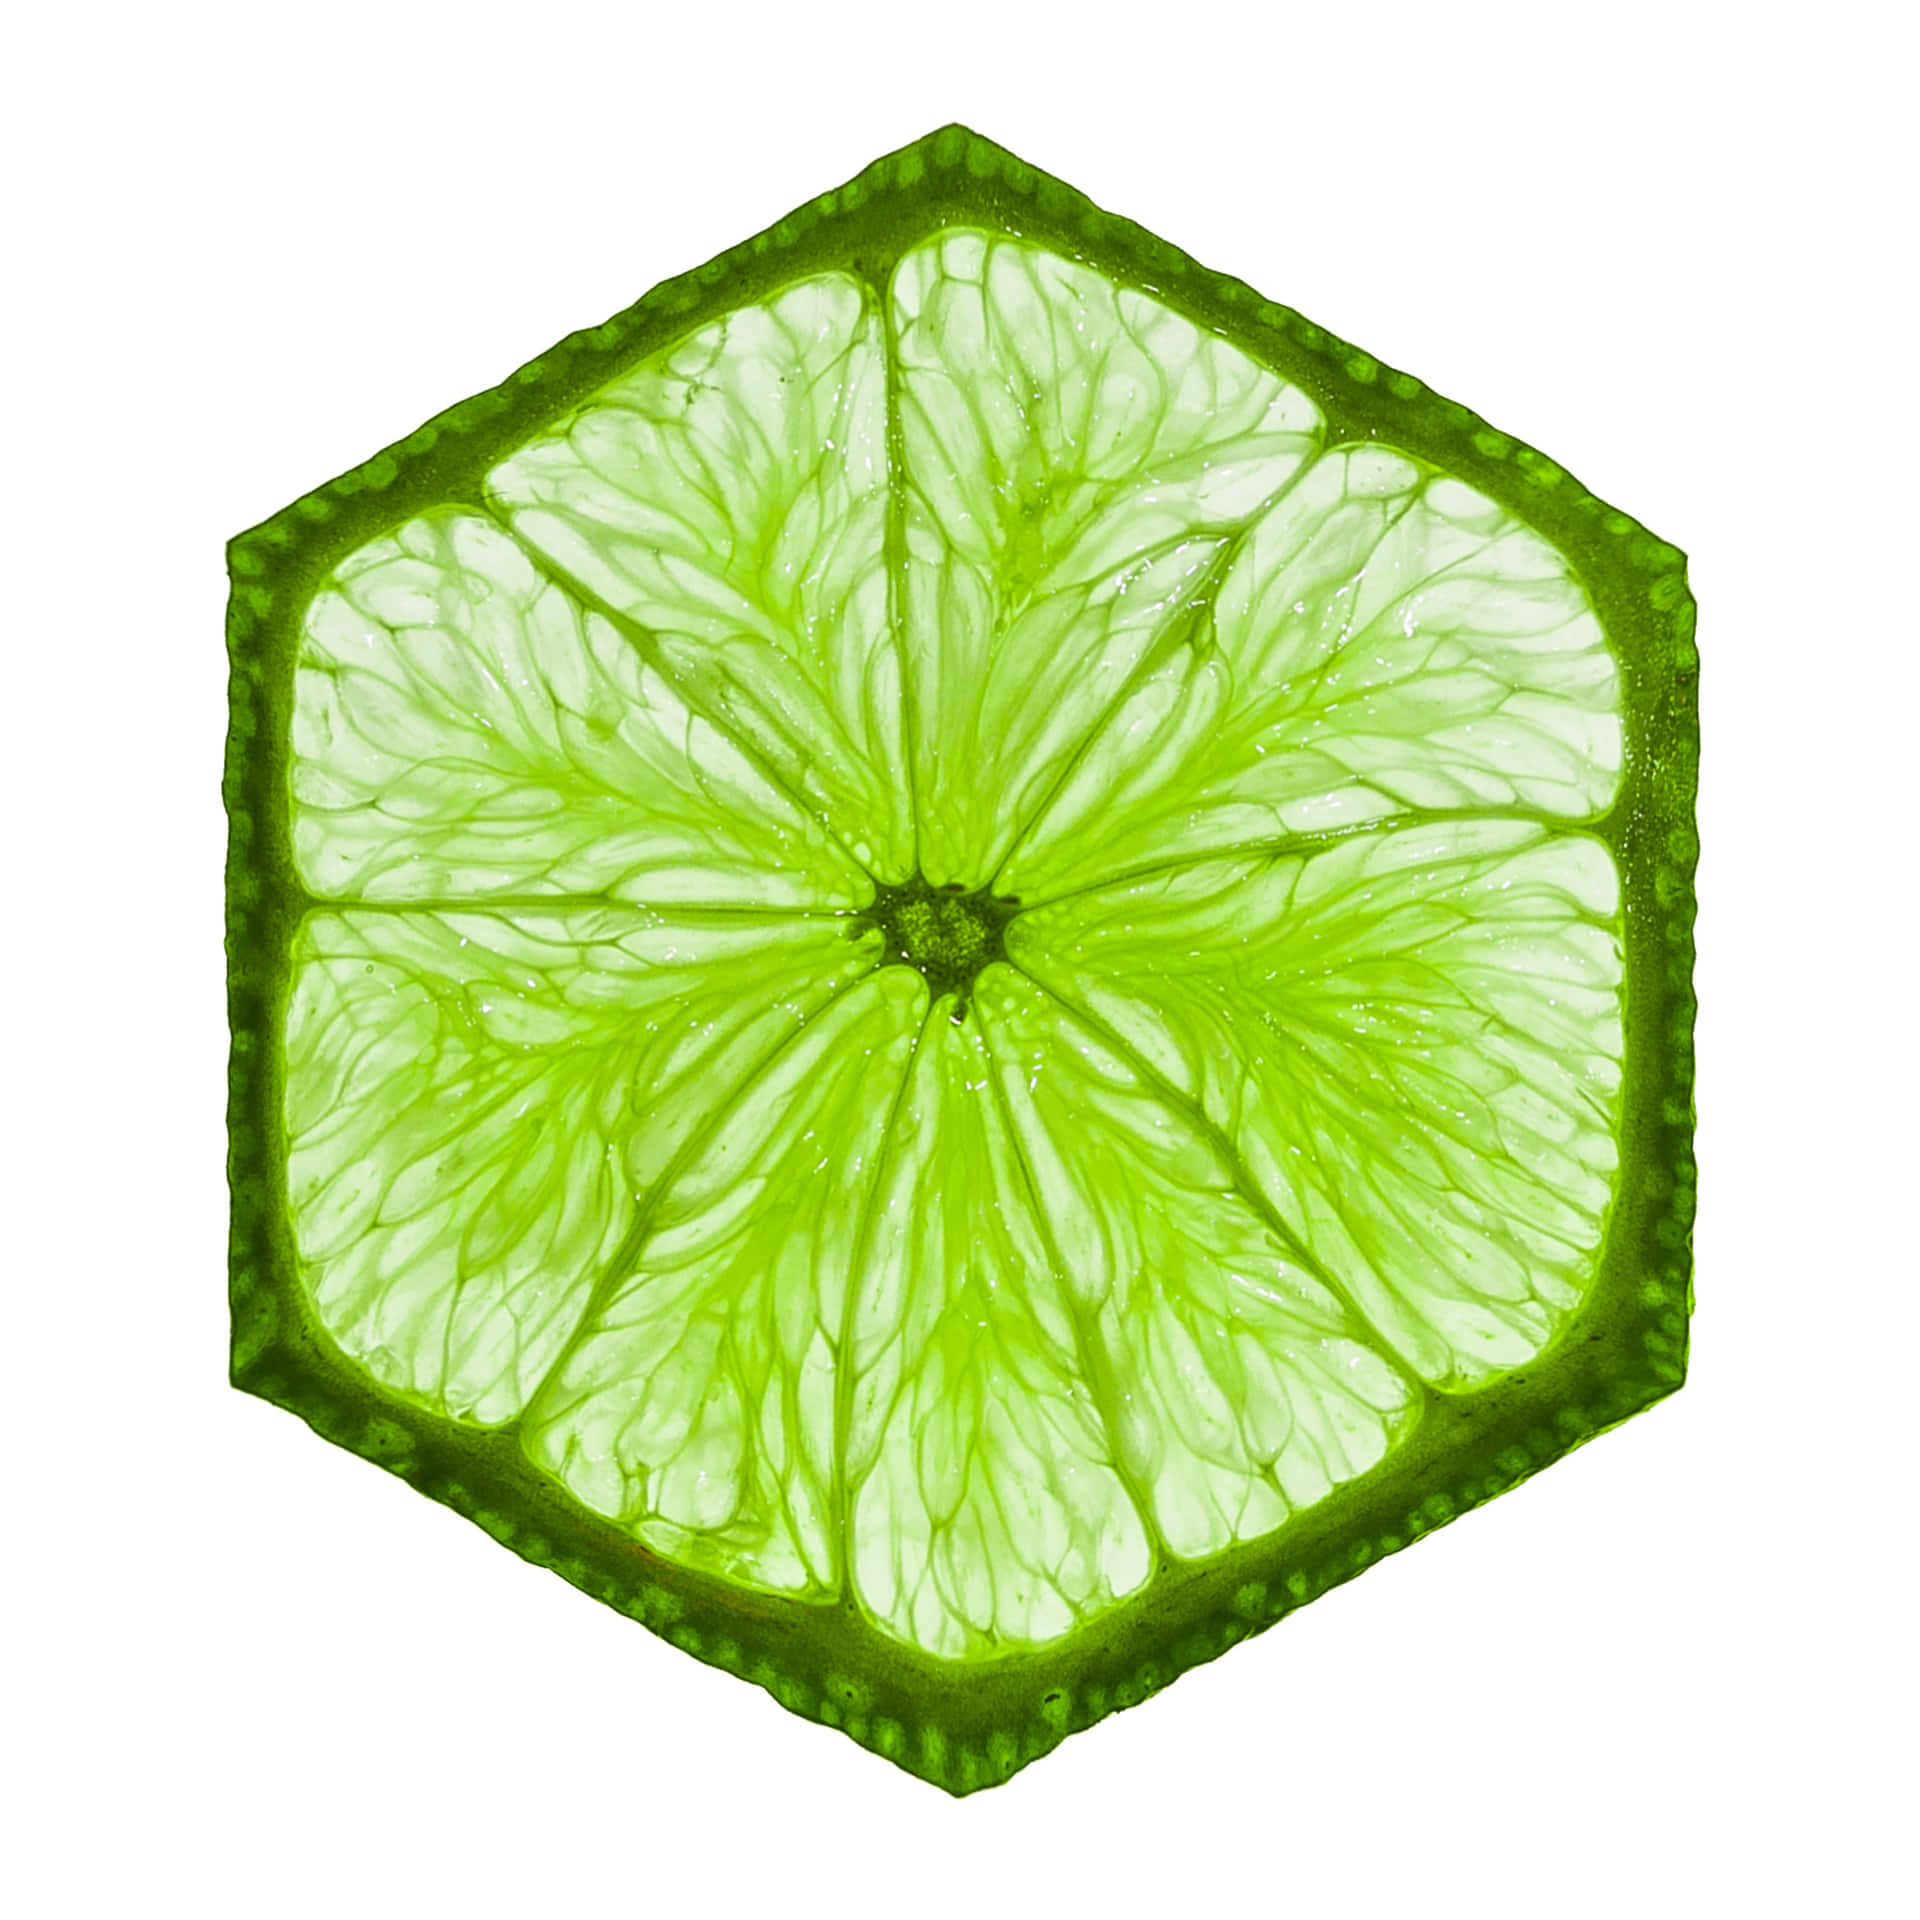 A Slice Of Lime On A White Background